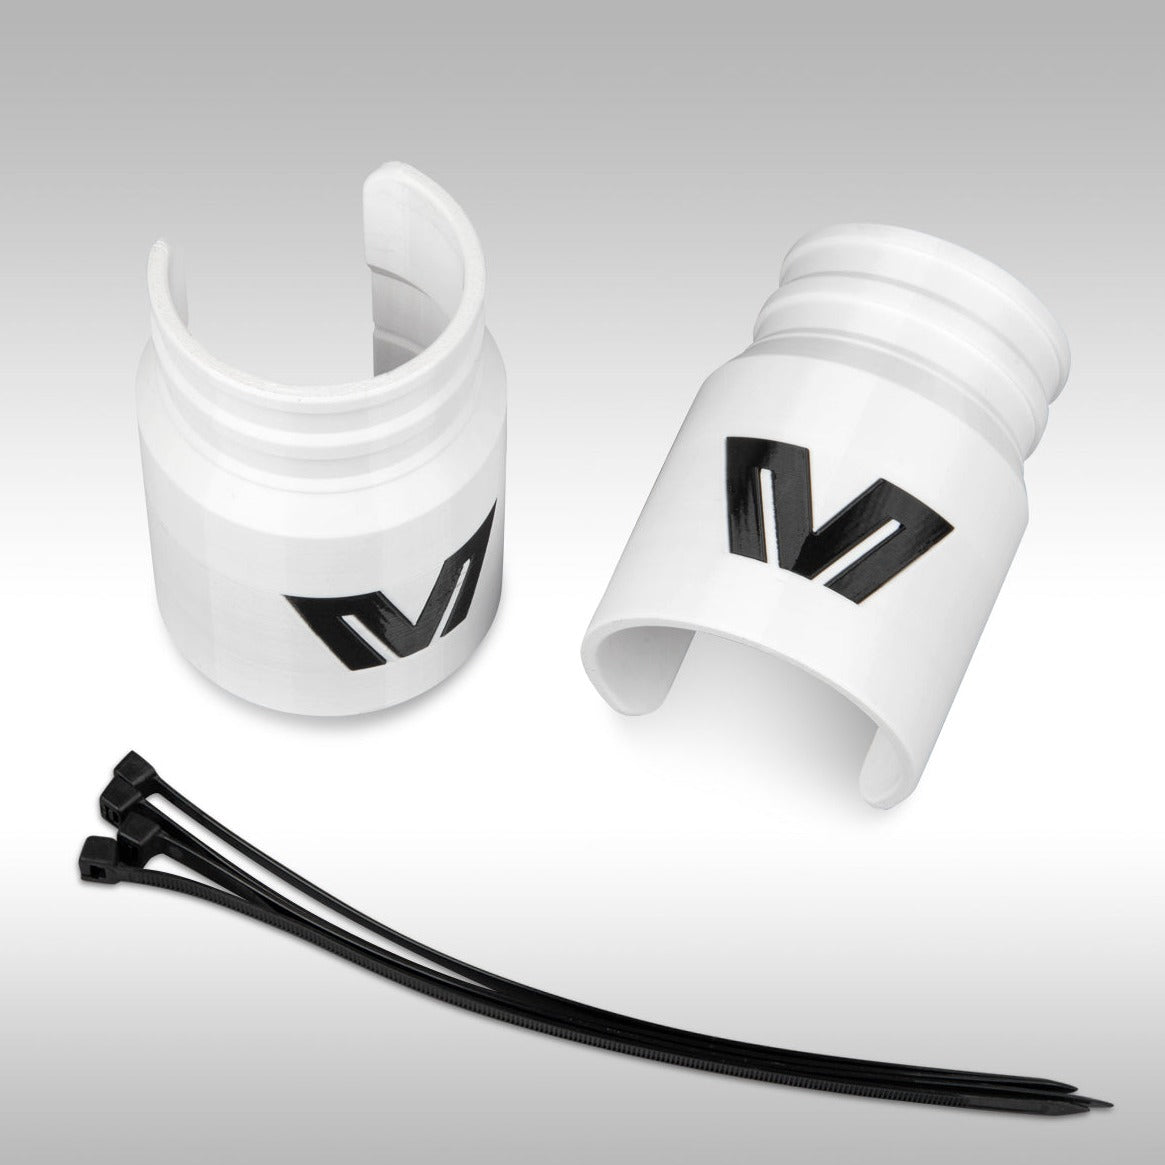 White DesertX fork mud guard. Additional plastic guard to help protect the Ducati Desert X fork seals from excessive mud buildup while riding offroad. 